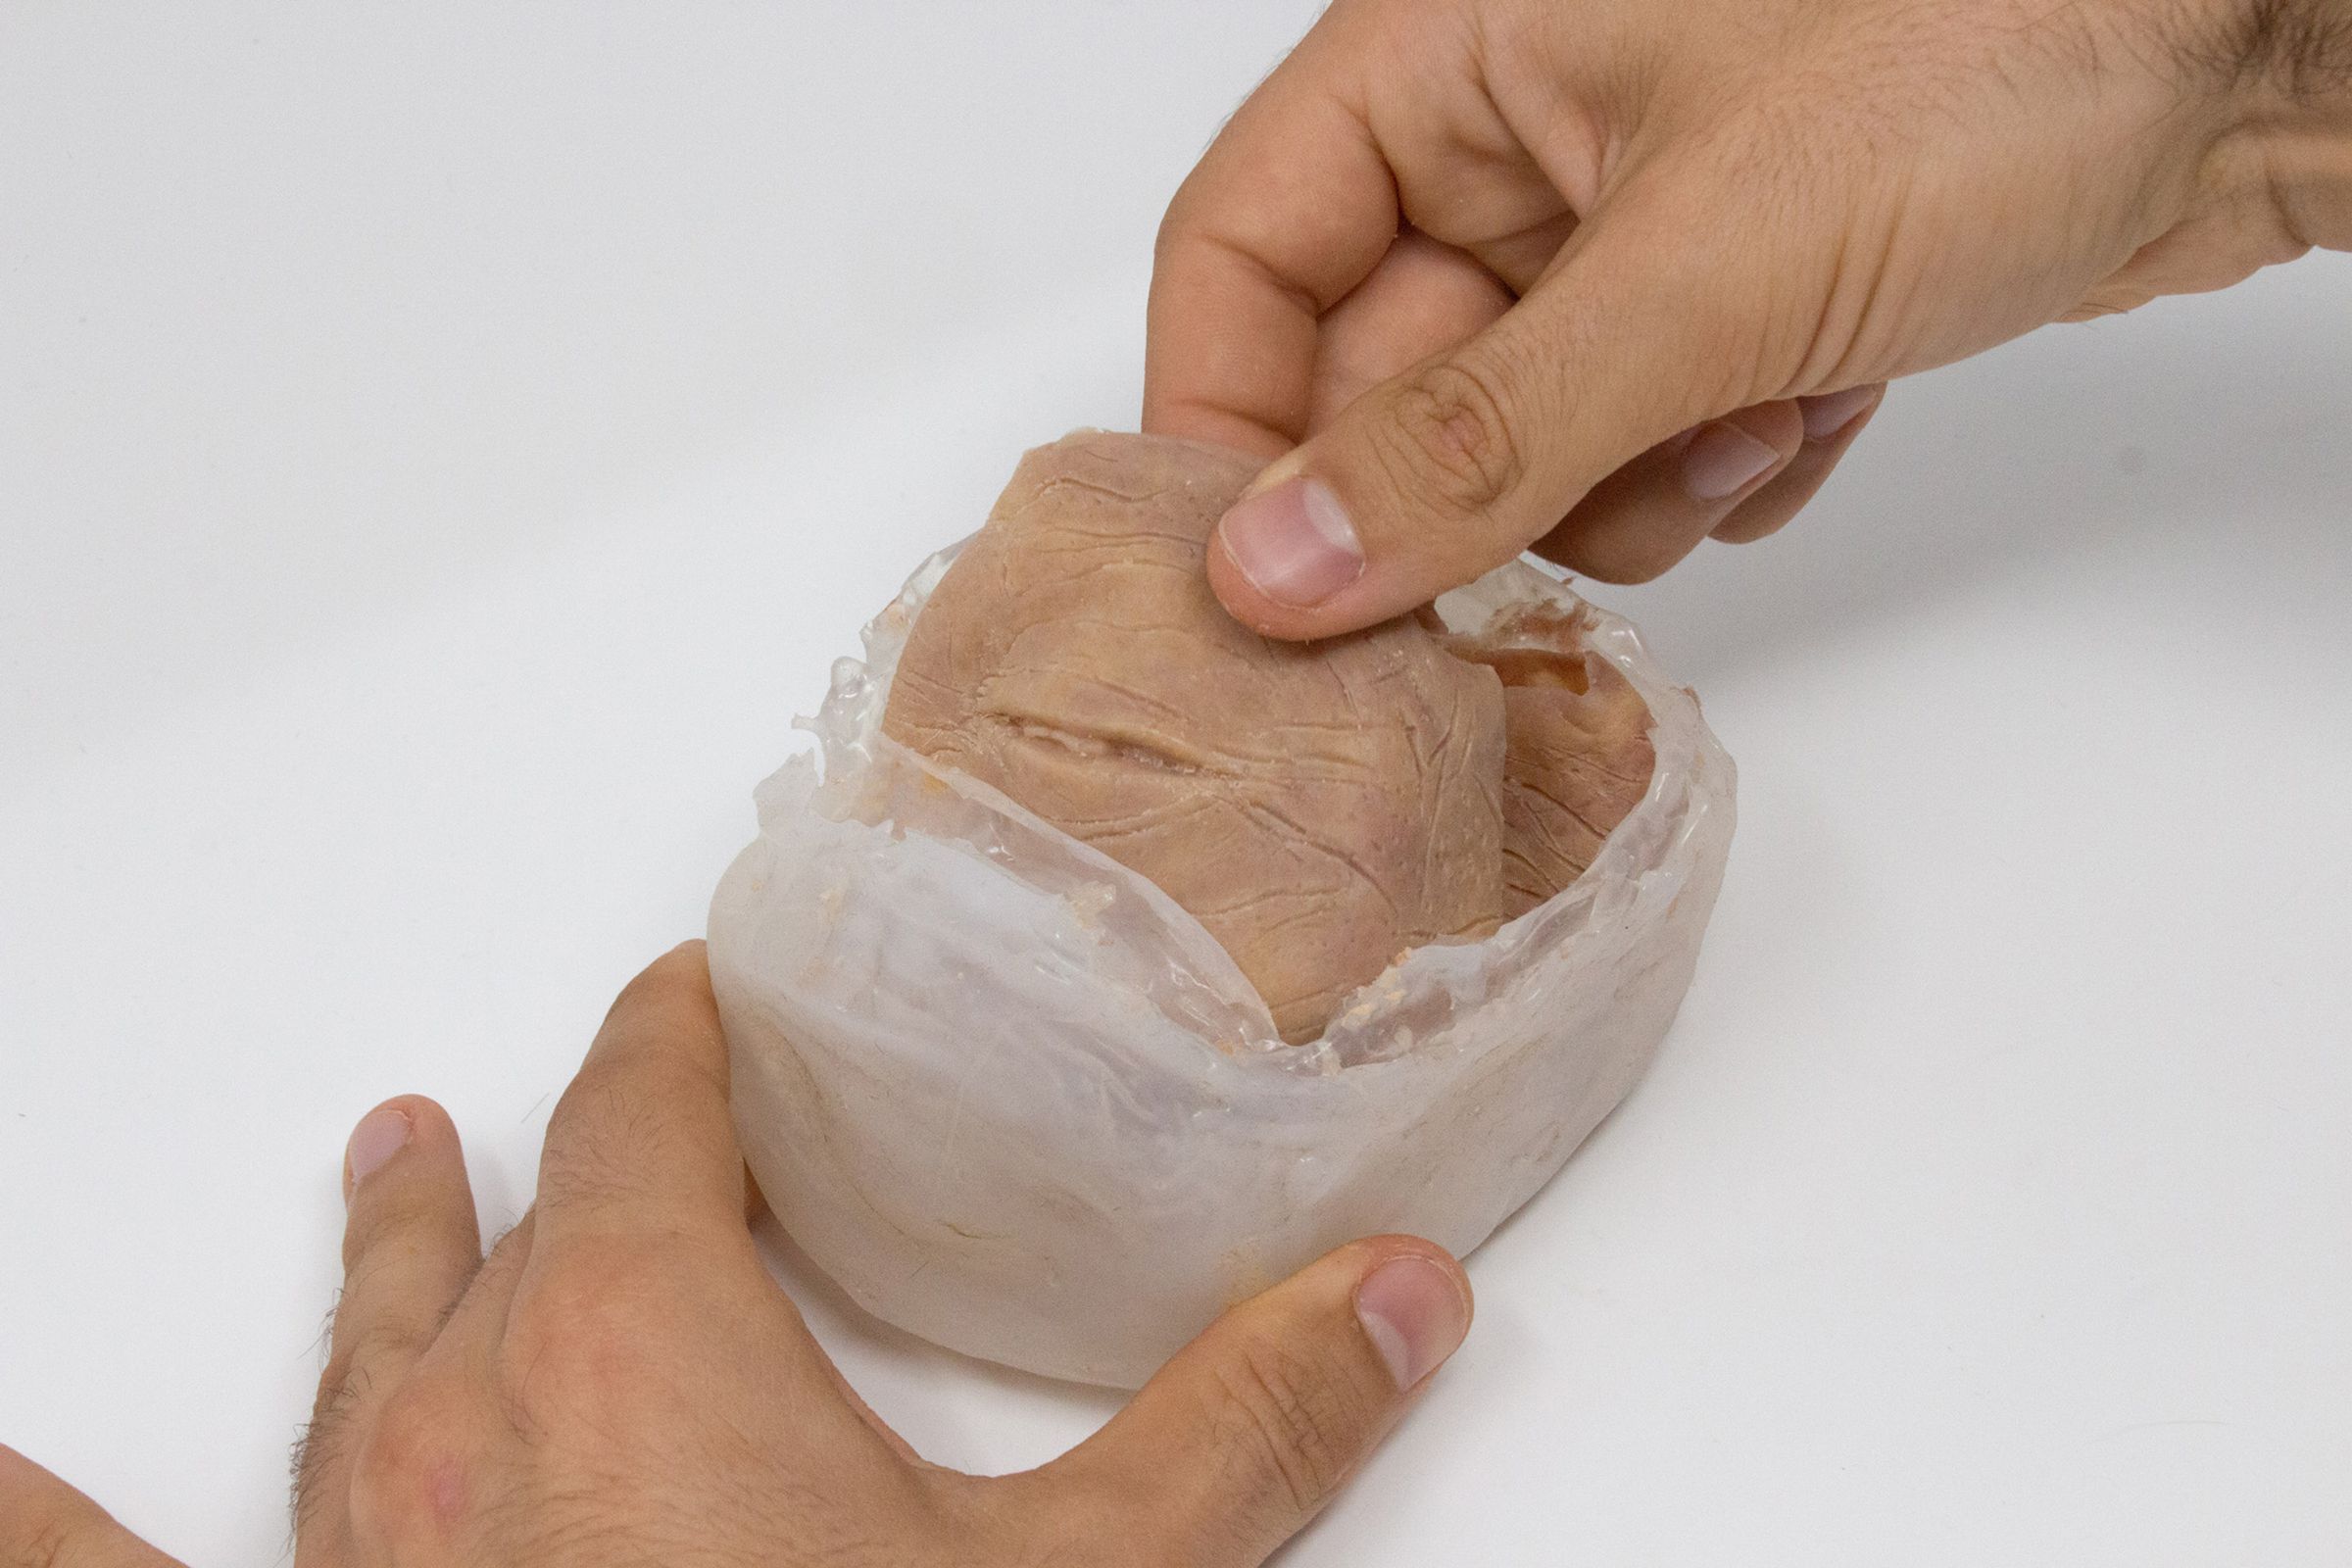 Two hands, one braced at the bottom of a container, and the other pulling out a chunk of synthetic flesh with eyelids. The eyeball has not been inserted yet. 